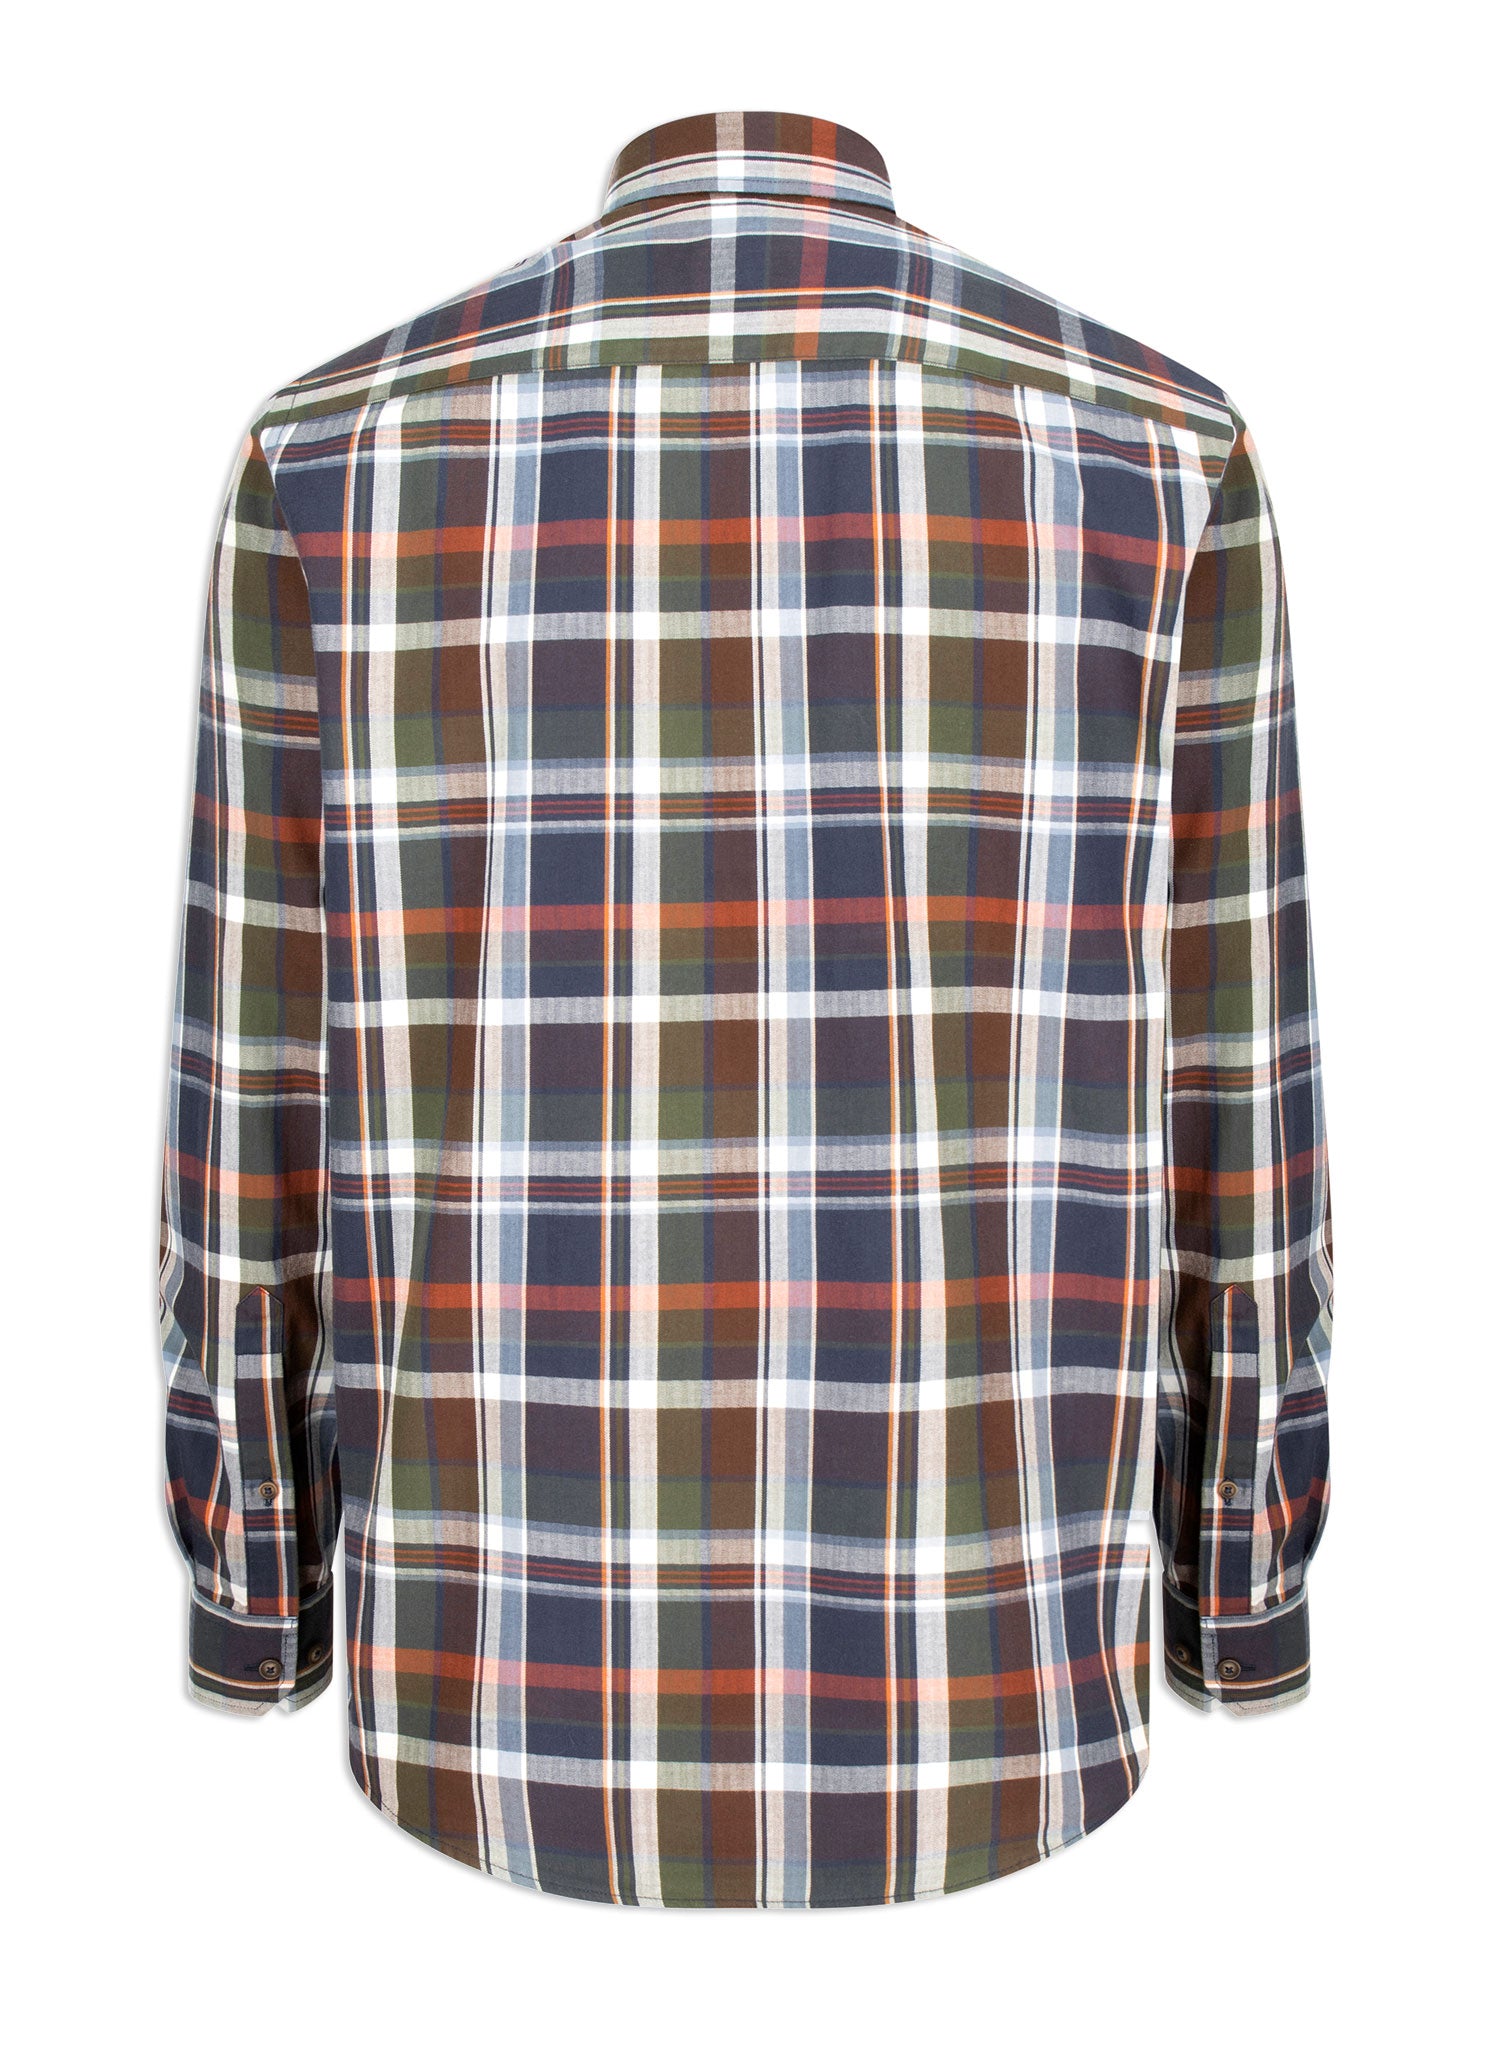 Hoggs of Fife Luthrie Plaid Shirt - Hollands Country Clothing 